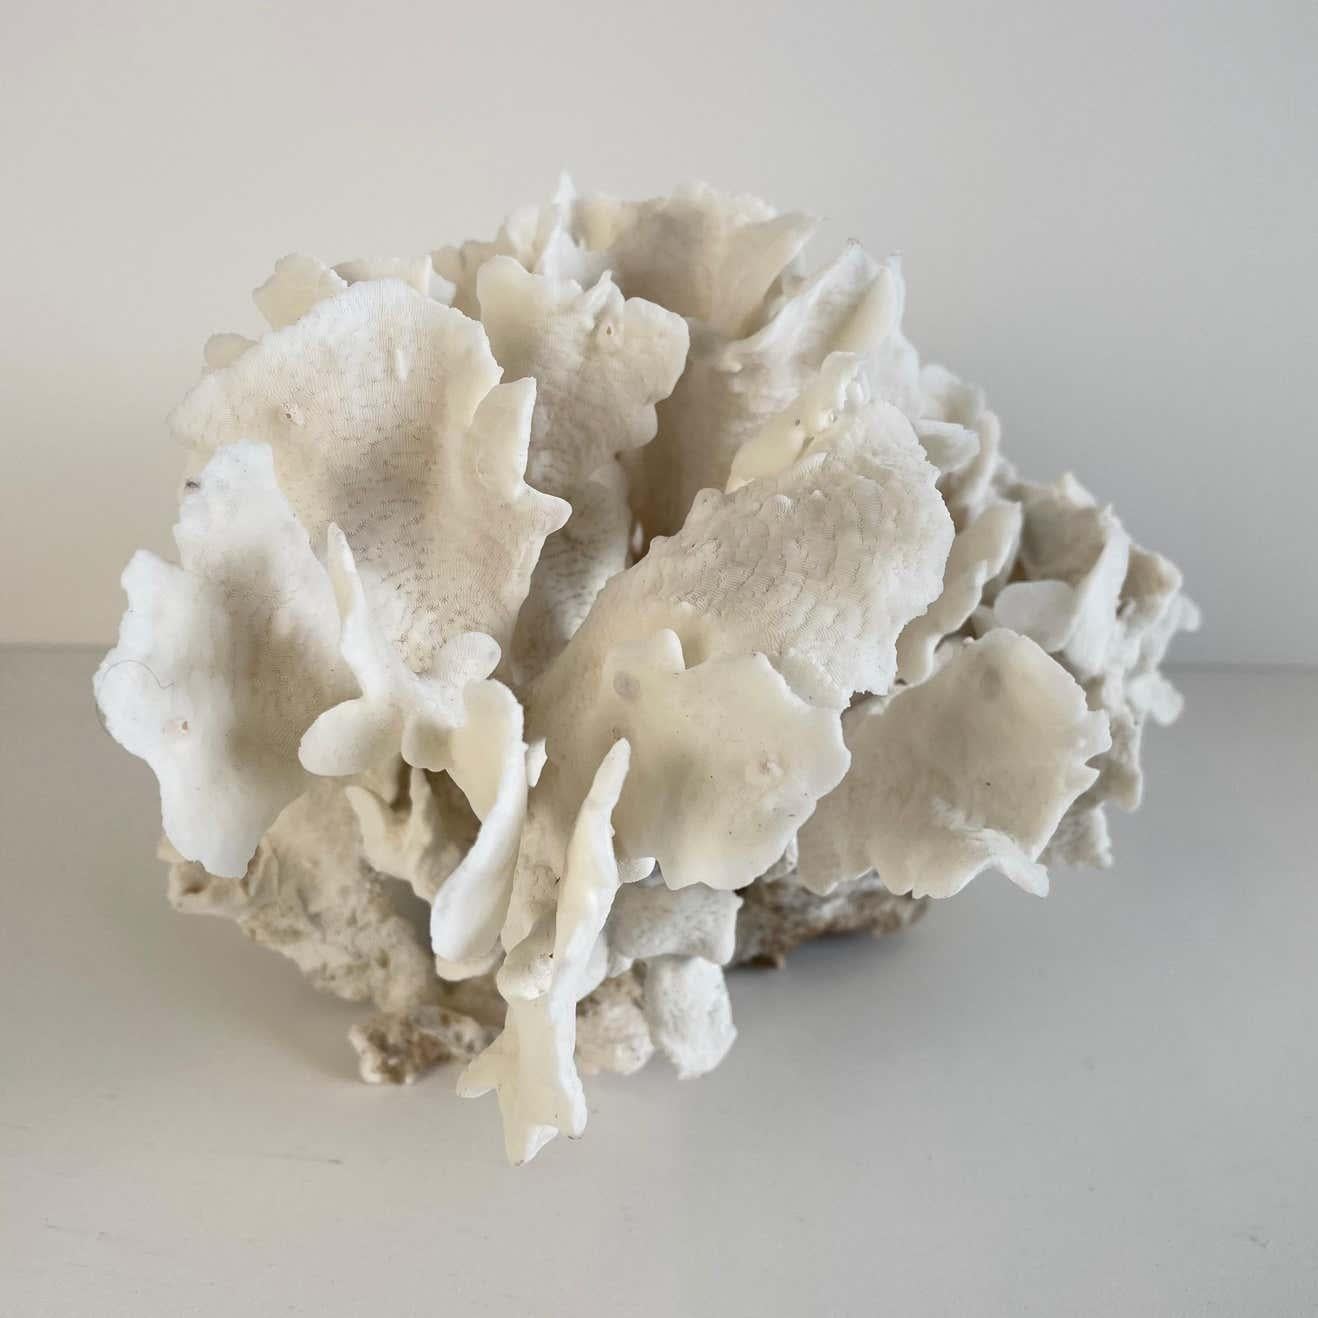 White lace cup coral this coral is real, not faux, and color is natural, not dyed. Each coral varies in size/shape and is one of a kind. The coral photographed is an example of one you may receive.

approximately 7